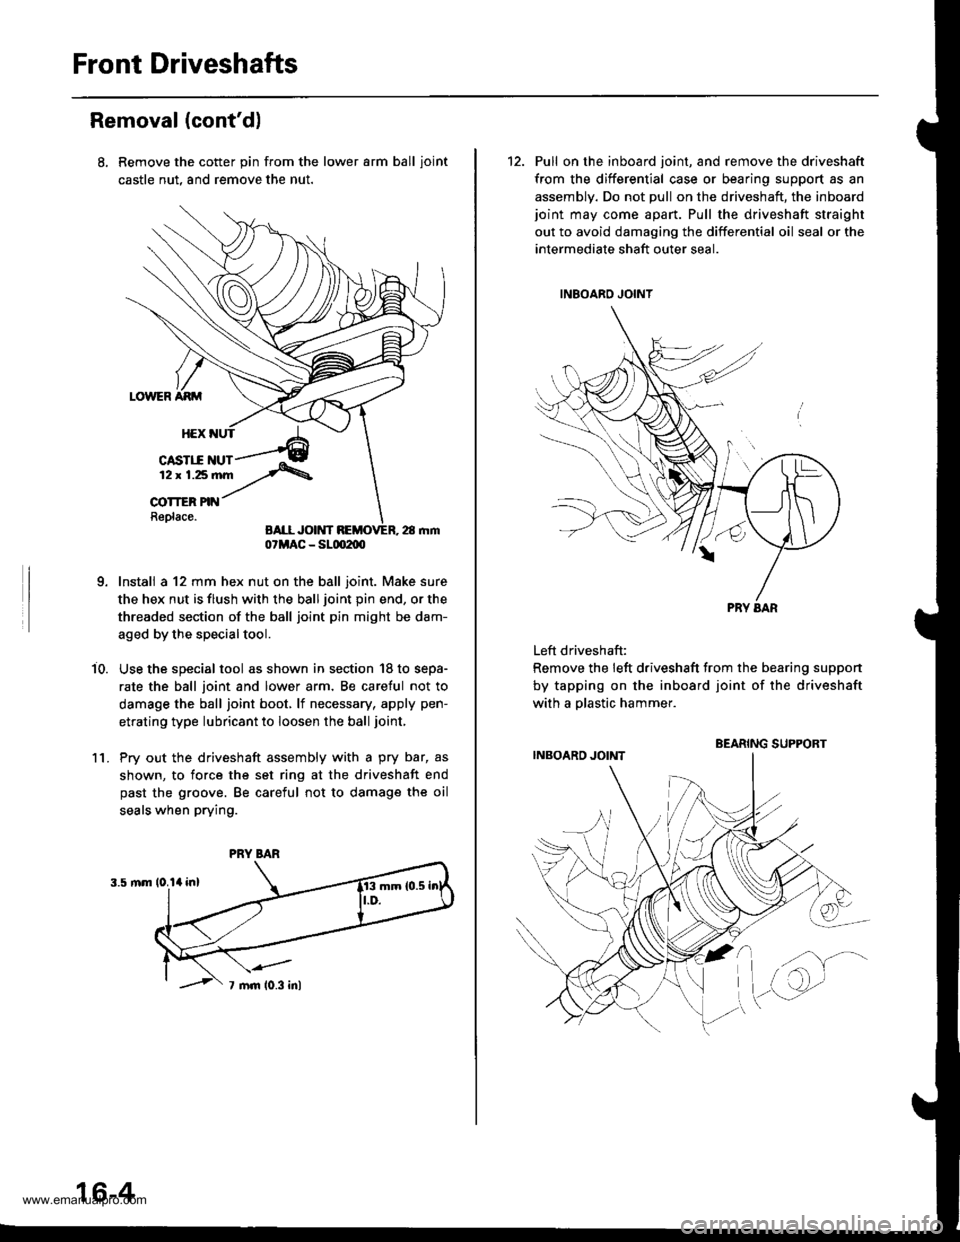 HONDA CR-V 1998 RD1-RD3 / 1.G Repair Manual 
Front Driveshafts
Removal (contd)
Remove the cotter pin from the lower arm ball ioint
castle nut, and remove the nut.
Install a 12 mm hex nut on the ball joint. Make sure
the hex nut is flush with t